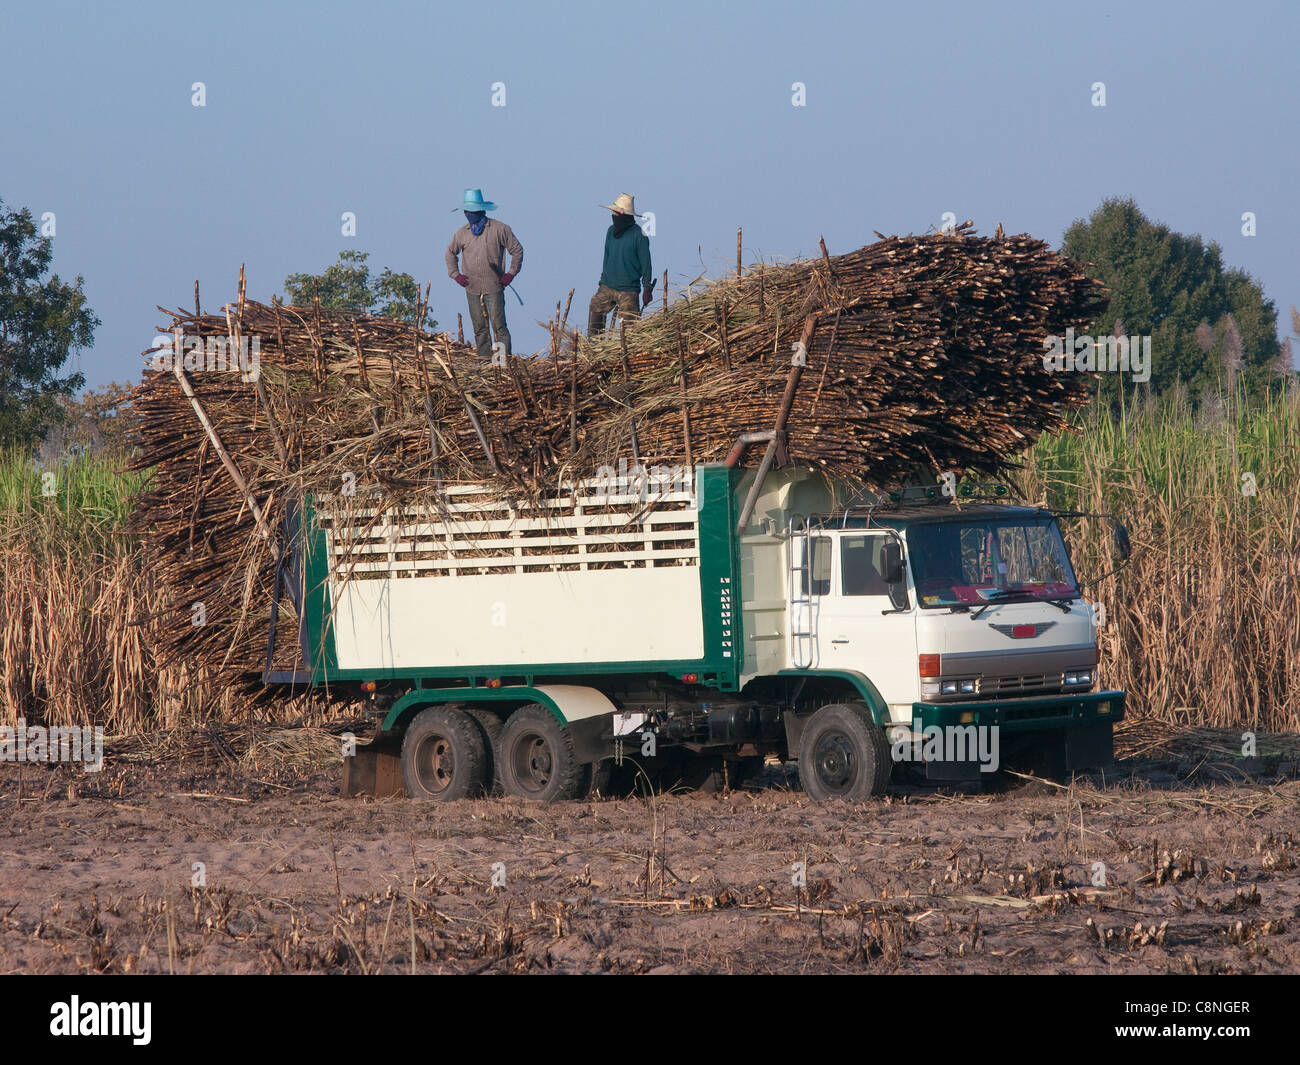 Truck loaded with sugarcane on a sugarcane field in Isan, Northeastern Thailand. Stock Photo